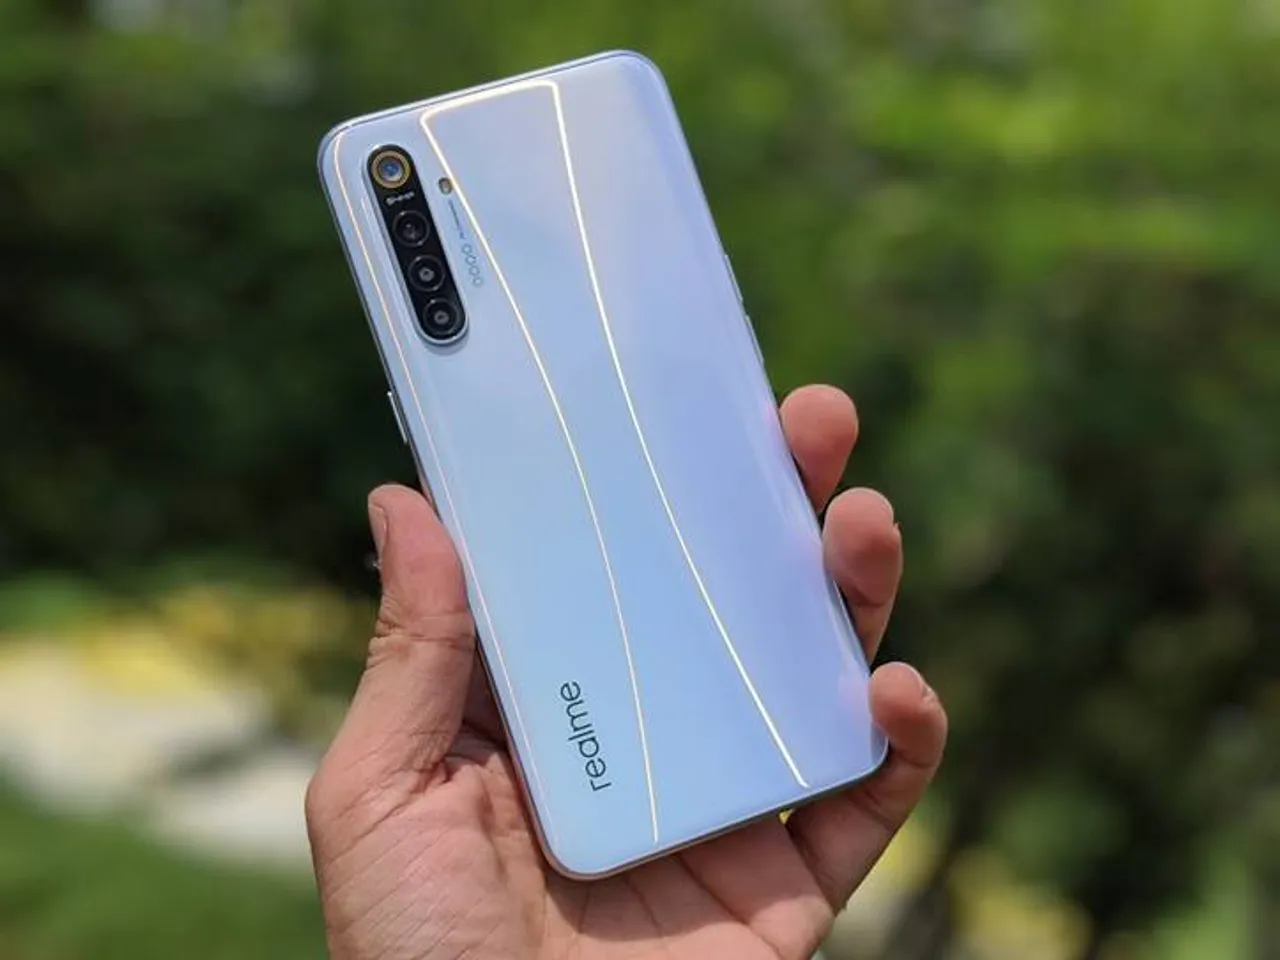 Realme XT smartphone review, specifications, price, availability